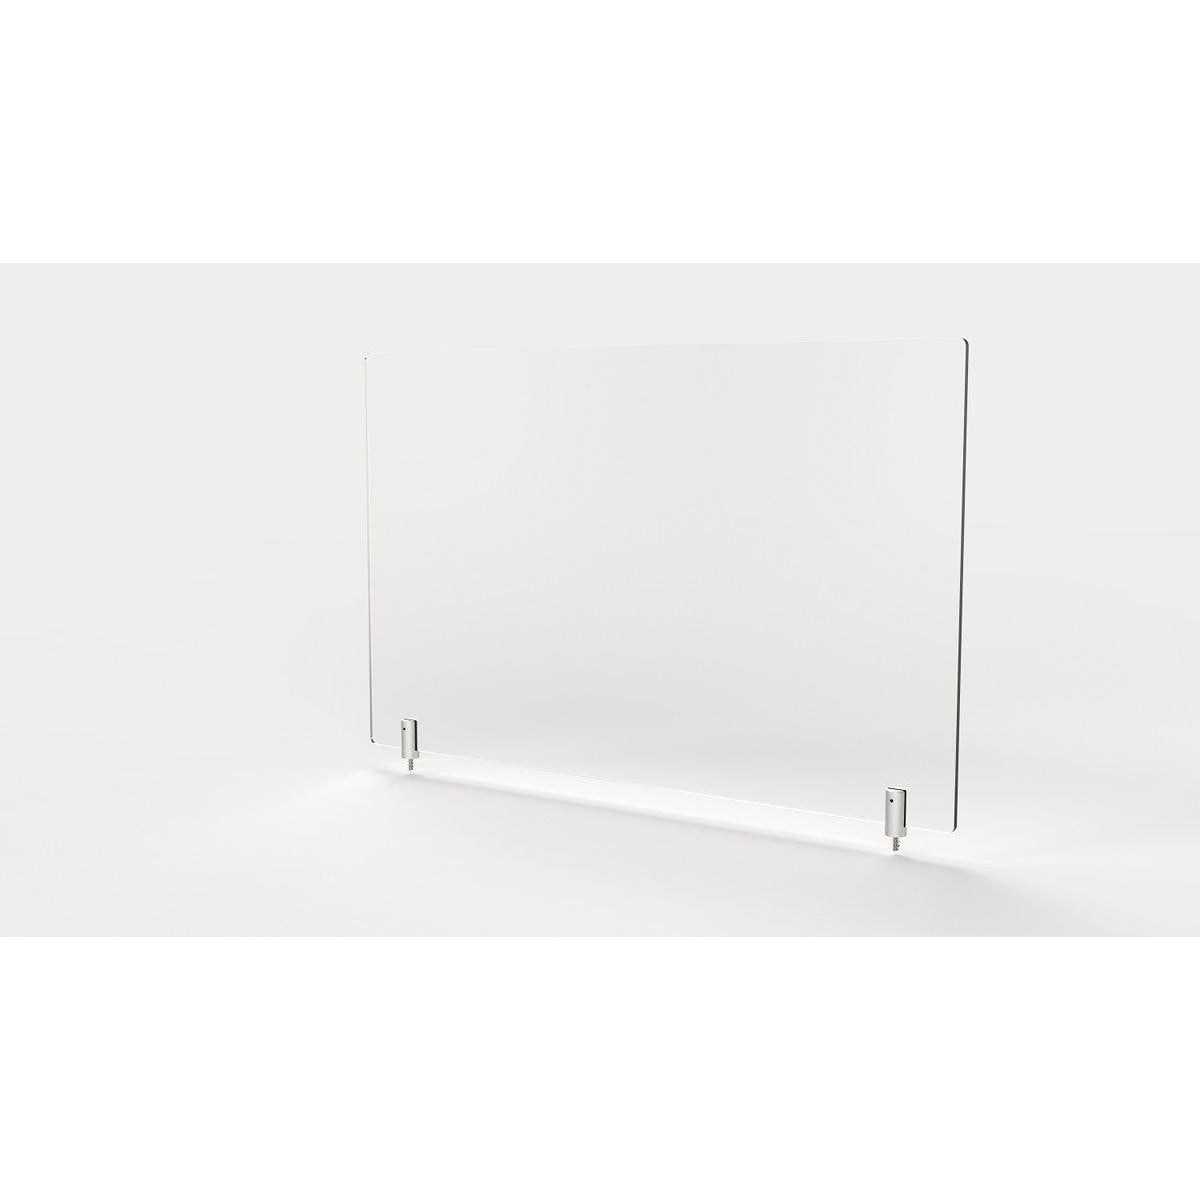 Frosted Thermoplastic Partition & Cubicle Extender with Permanent Screw Attachment, 24"H x 42"W